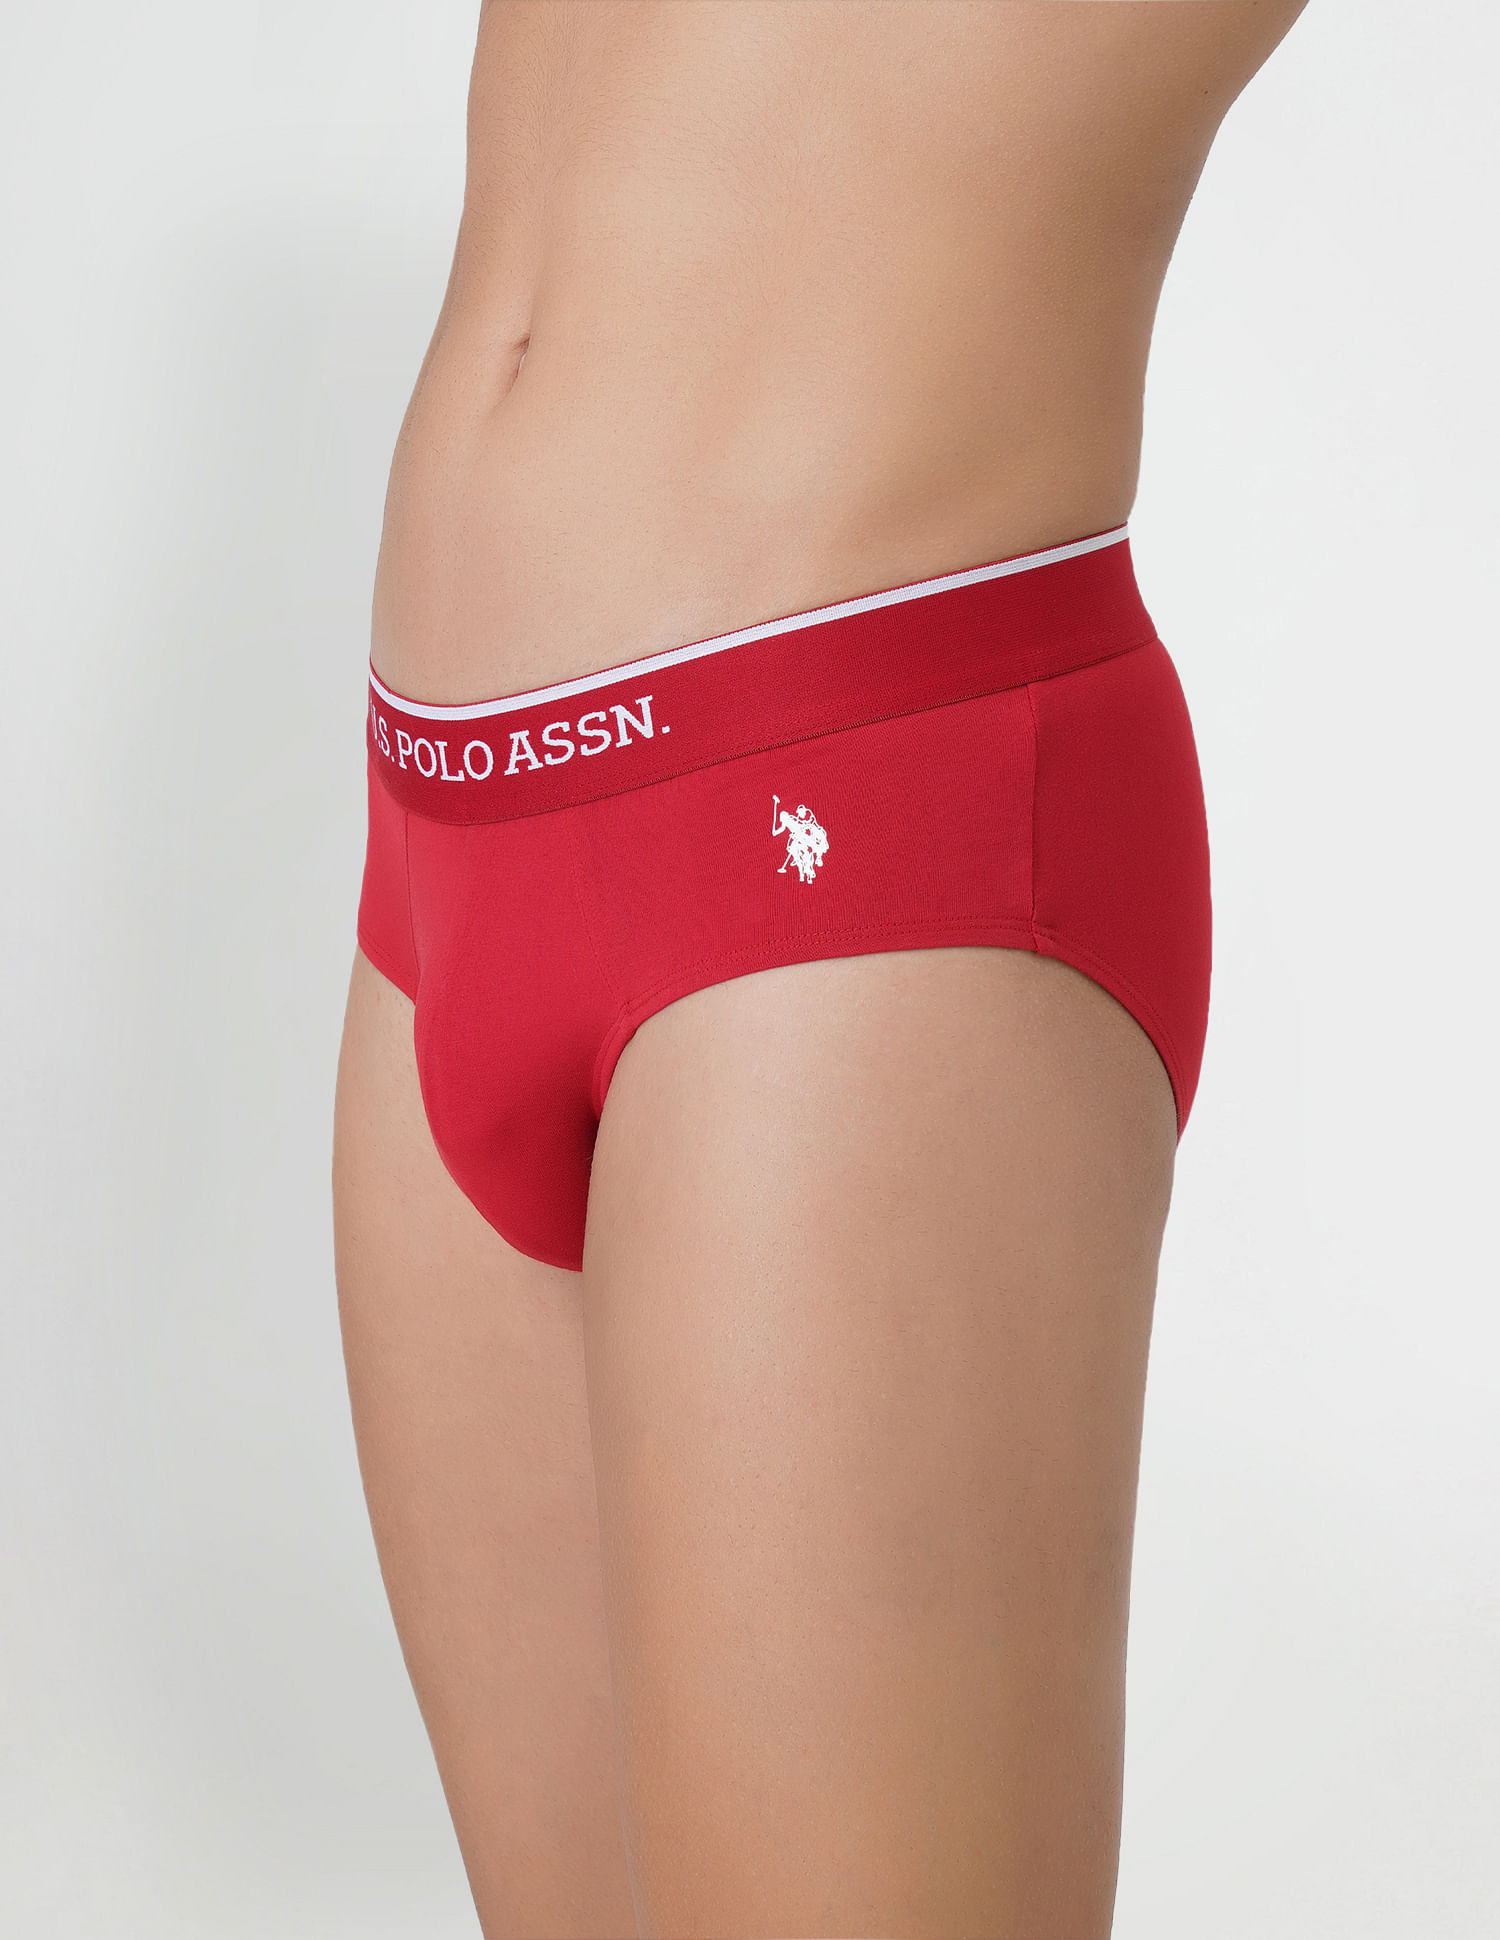 Two-way stretch jersey Brando briefs in Red for